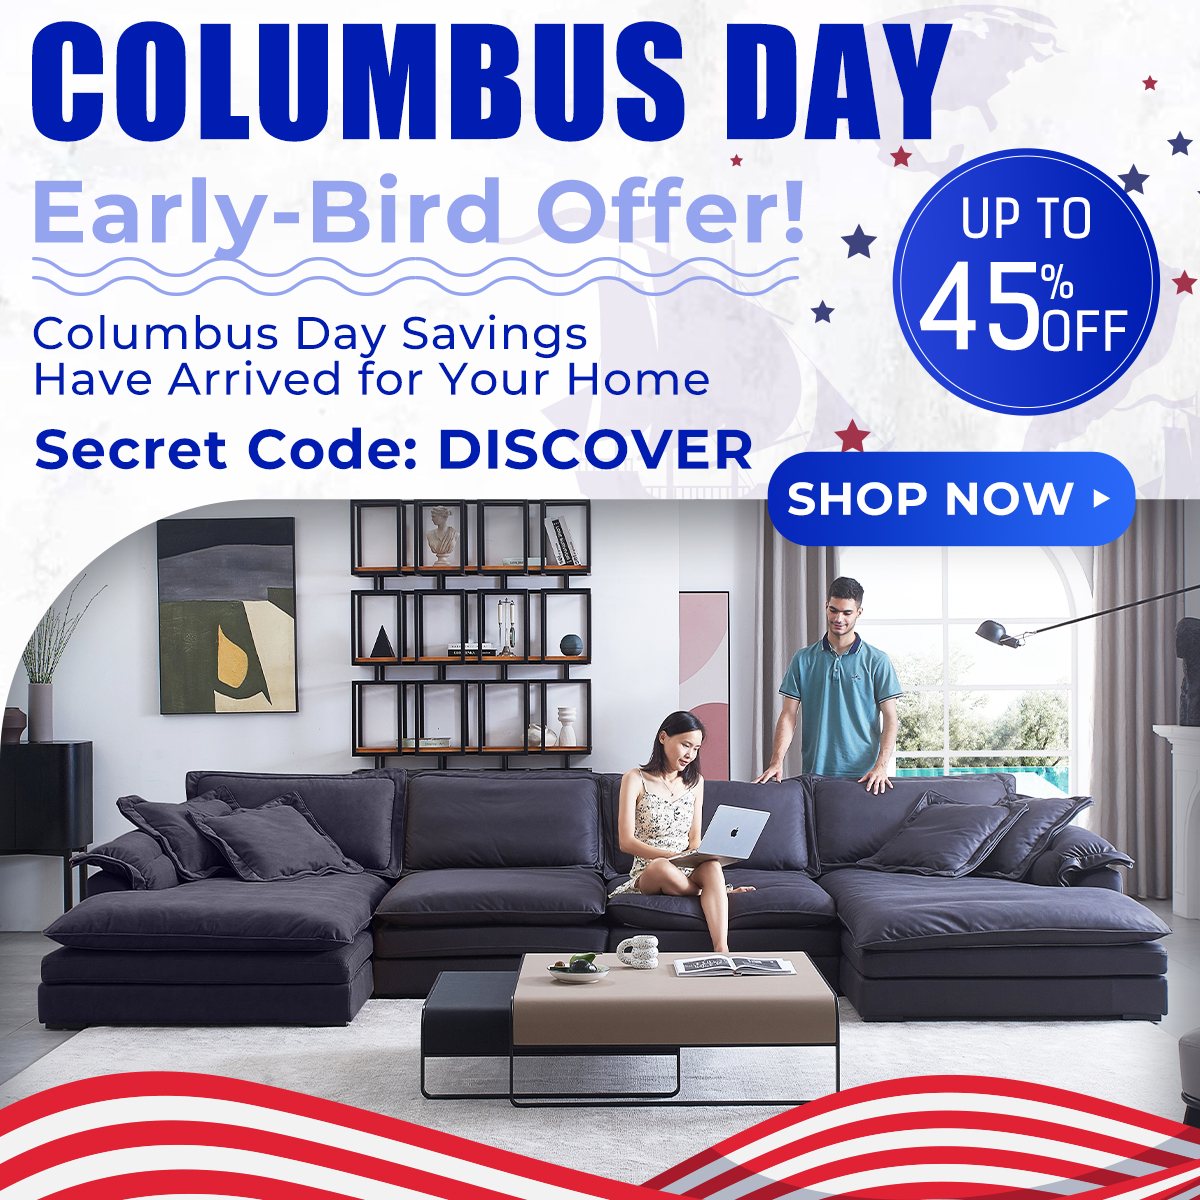 Early-birds look here! Make sure y'all got the secrect code🎉 🎉 
25home.club/44jLuHy

#25home #25homefurniture #columbusday #homedecorating #interiordesign #cozyvibes #livingroomdecor #livingroomdesign #neutrallivingroom #neutraldecor #interiordesign #interiors #homedecor